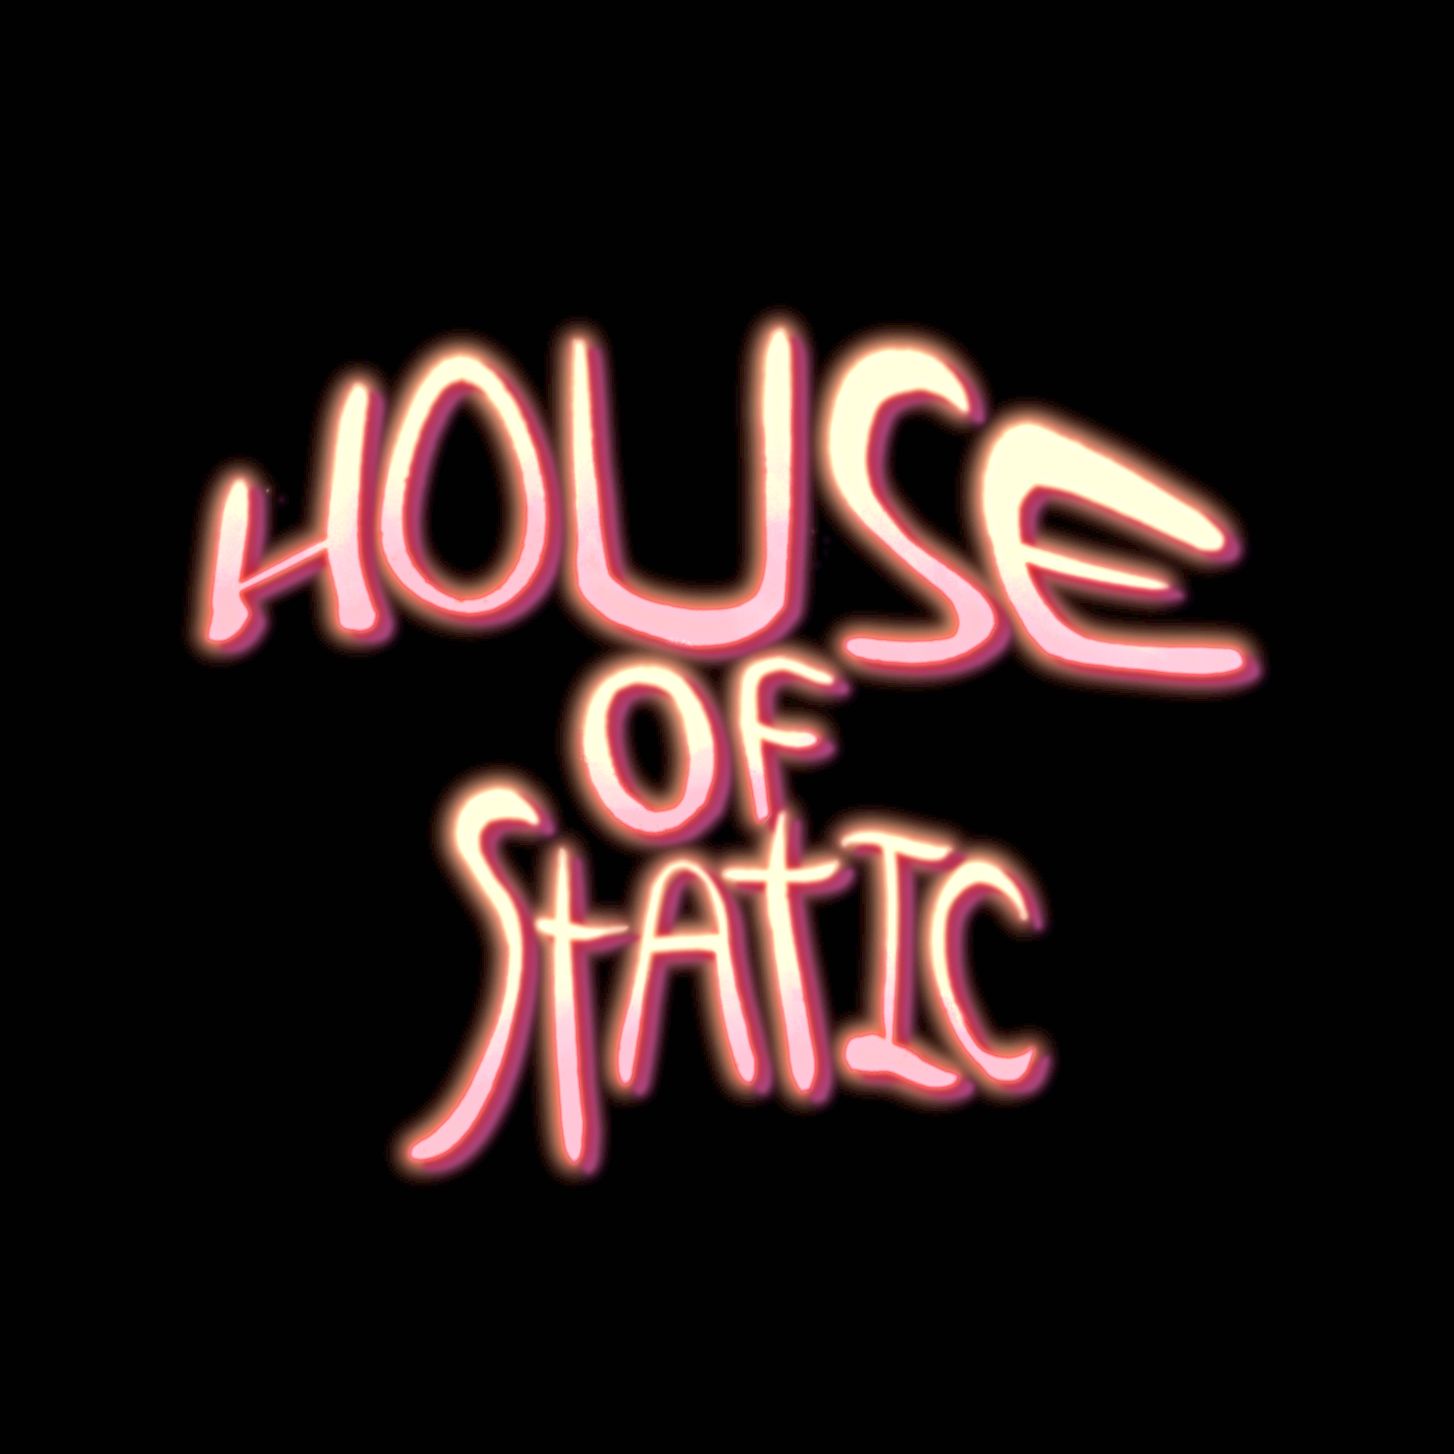 House of Static Records